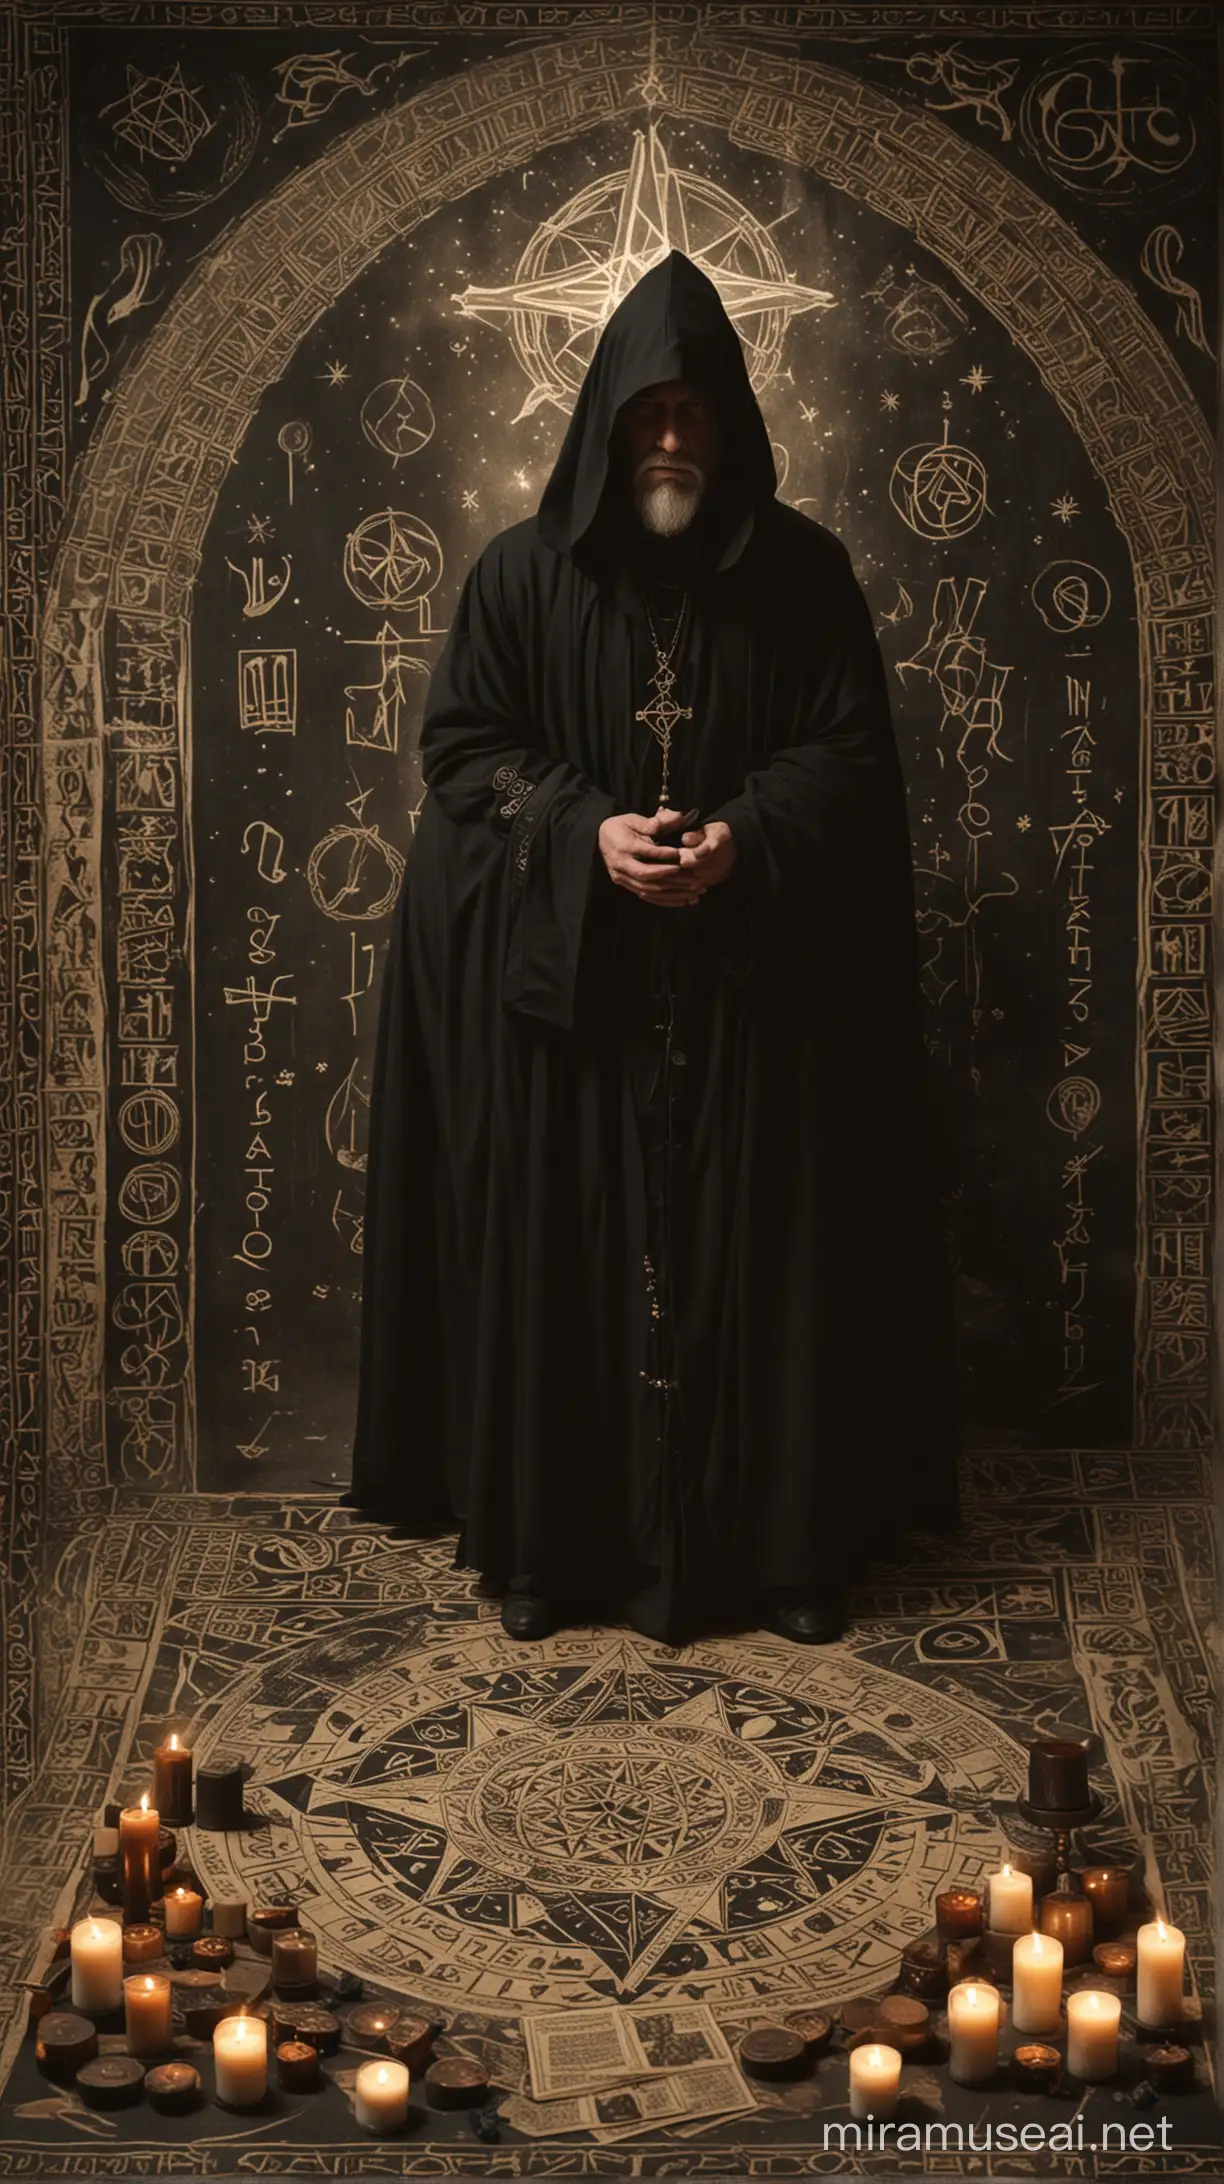 In the dimness of an occult chamber, where the veil between worlds is thin, rests the old sage, guardian of arcane secrets. Clad in a black cloak adorned with mystical symbols, his eyes pierce the soul, reflecting millennia of wisdom. Around him, a chaotic library of esoteric knowledge rises, with prominent titles like "The Book of the Law" and works by Aleister Crowley. Ancient artifacts adorn the corners, while runes and pentagrams are traced on the floor, invoking ancient powers.Upon the table, a game board is meticulously arranged, with tarot cards revealing the secrets of fate. Incense burns slowly, filling the air with ancestral aromas, while candle flames dance in a hypnotic ritual. The sage, immersed in contemplation, awaits silently, ready to share his knowledge with those who seek the hidden truth in the recesses of the universe.
In the darkness of a dimly lit chamber, where shadows linger and mysteries abound, the old sage sits. Cloaked in black, adorned with mystical symbols, his presence commands reverence. Around him, the room is filled with an aura of enigma, as ancient tomes and occult artifacts scatter in disarray. Illuminated only by the flickering light of candles, the sage's eyes gleam with profound insight, piercing through the darkness to reveal the hidden truths of the universe.
In the dim glow cast by flickering candlelight, the old sage sits in a room enveloped in shadows. Cloaked in black robes adorned with mystical symbols, he emanates an aura of ancient wisdom. Around him, the darkness is punctuated by the soft glow of candles, illuminating the chaotic arrangement of ancient tomes and occult artifacts. With eyes that seem to hold the secrets of the cosmos, the sage sits in silent contemplation, offering glimpses into the mysteries of the universe to those who dare to seek his guidance.

